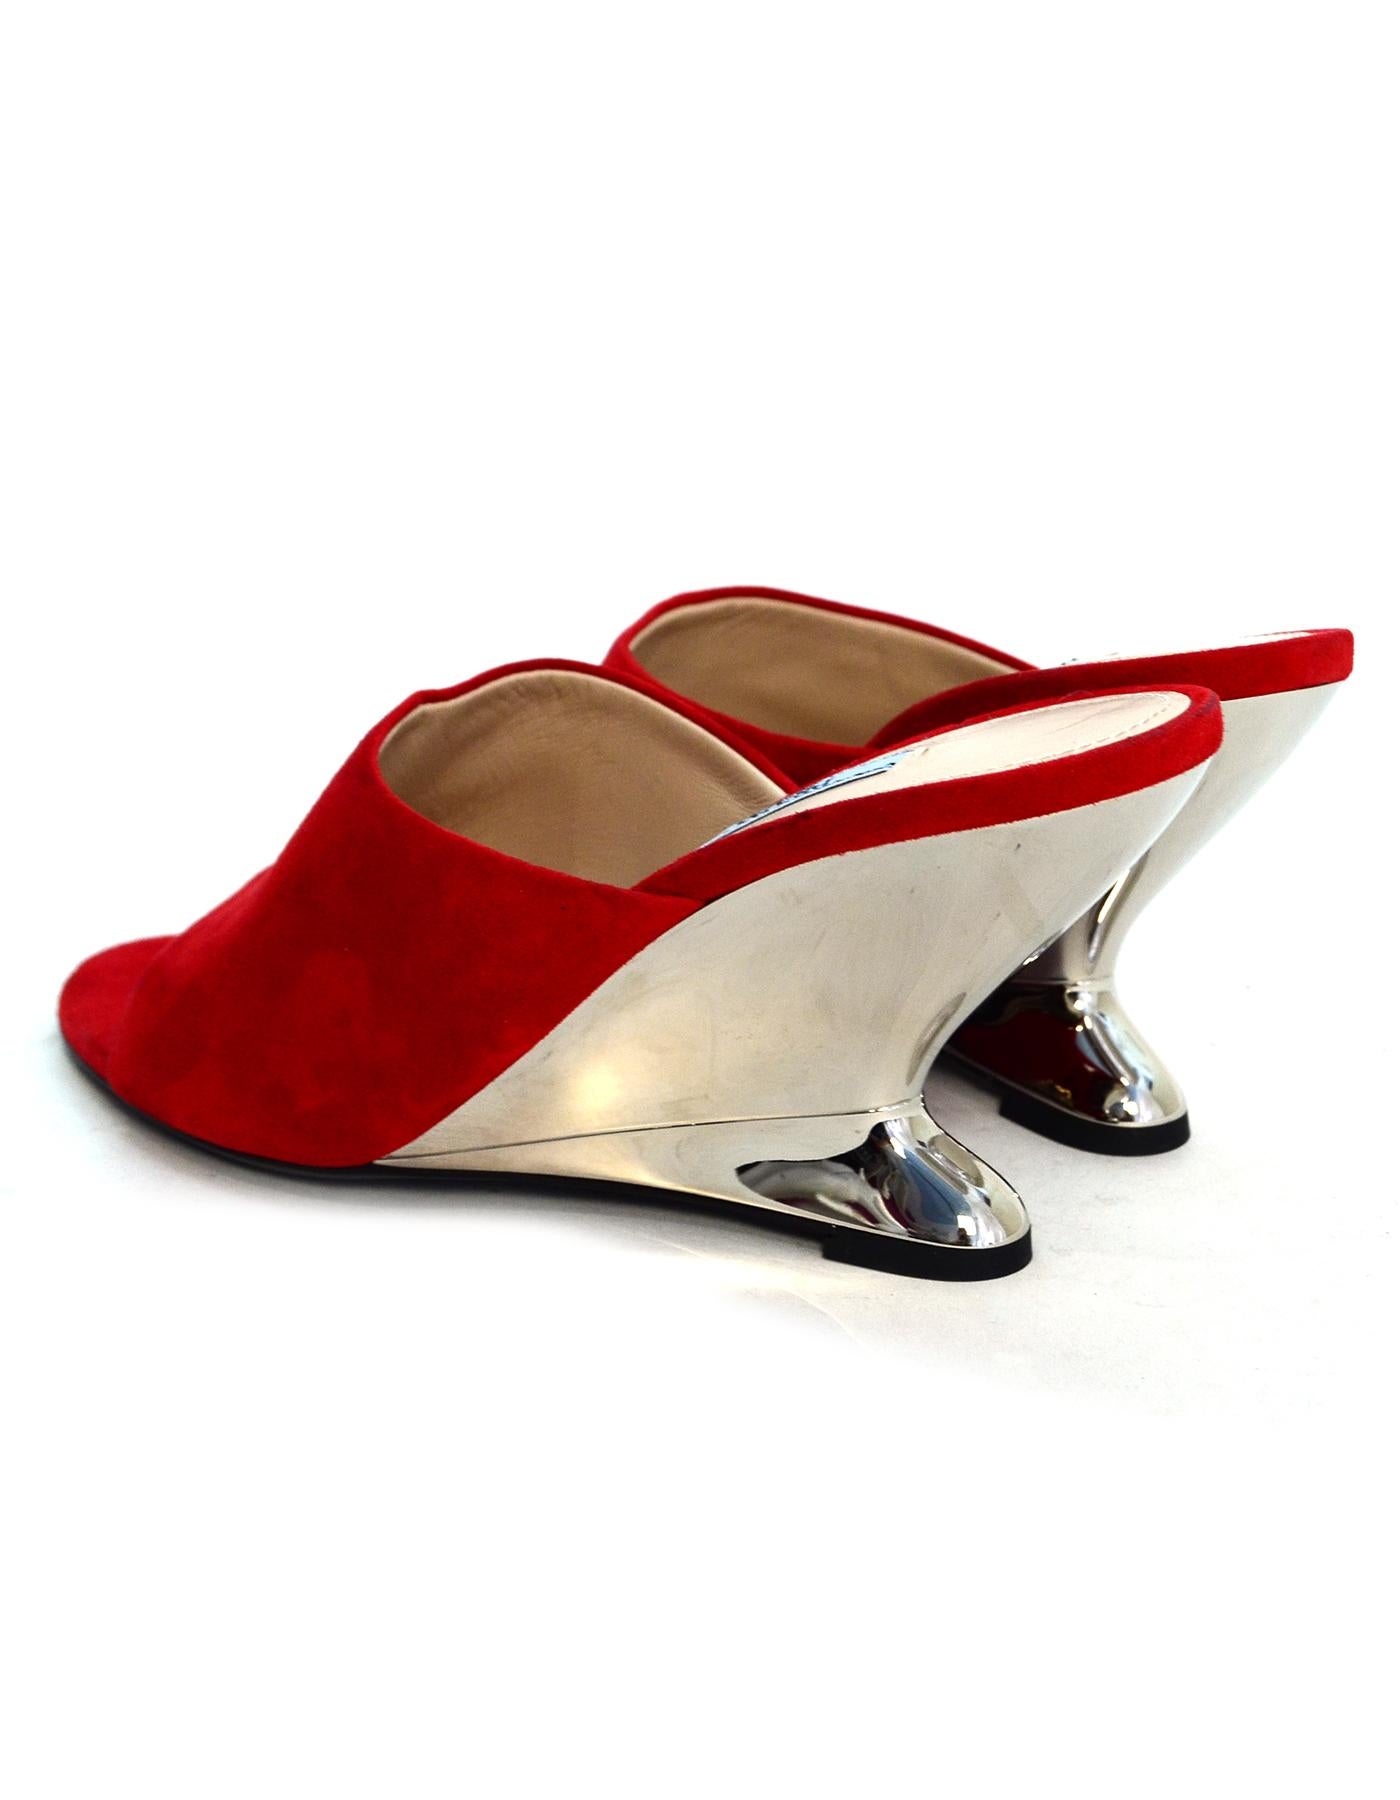 Prada Red Sculptural Metallic Wedge Heel Mules sz 39.5 rt $850 In New Condition In New York, NY